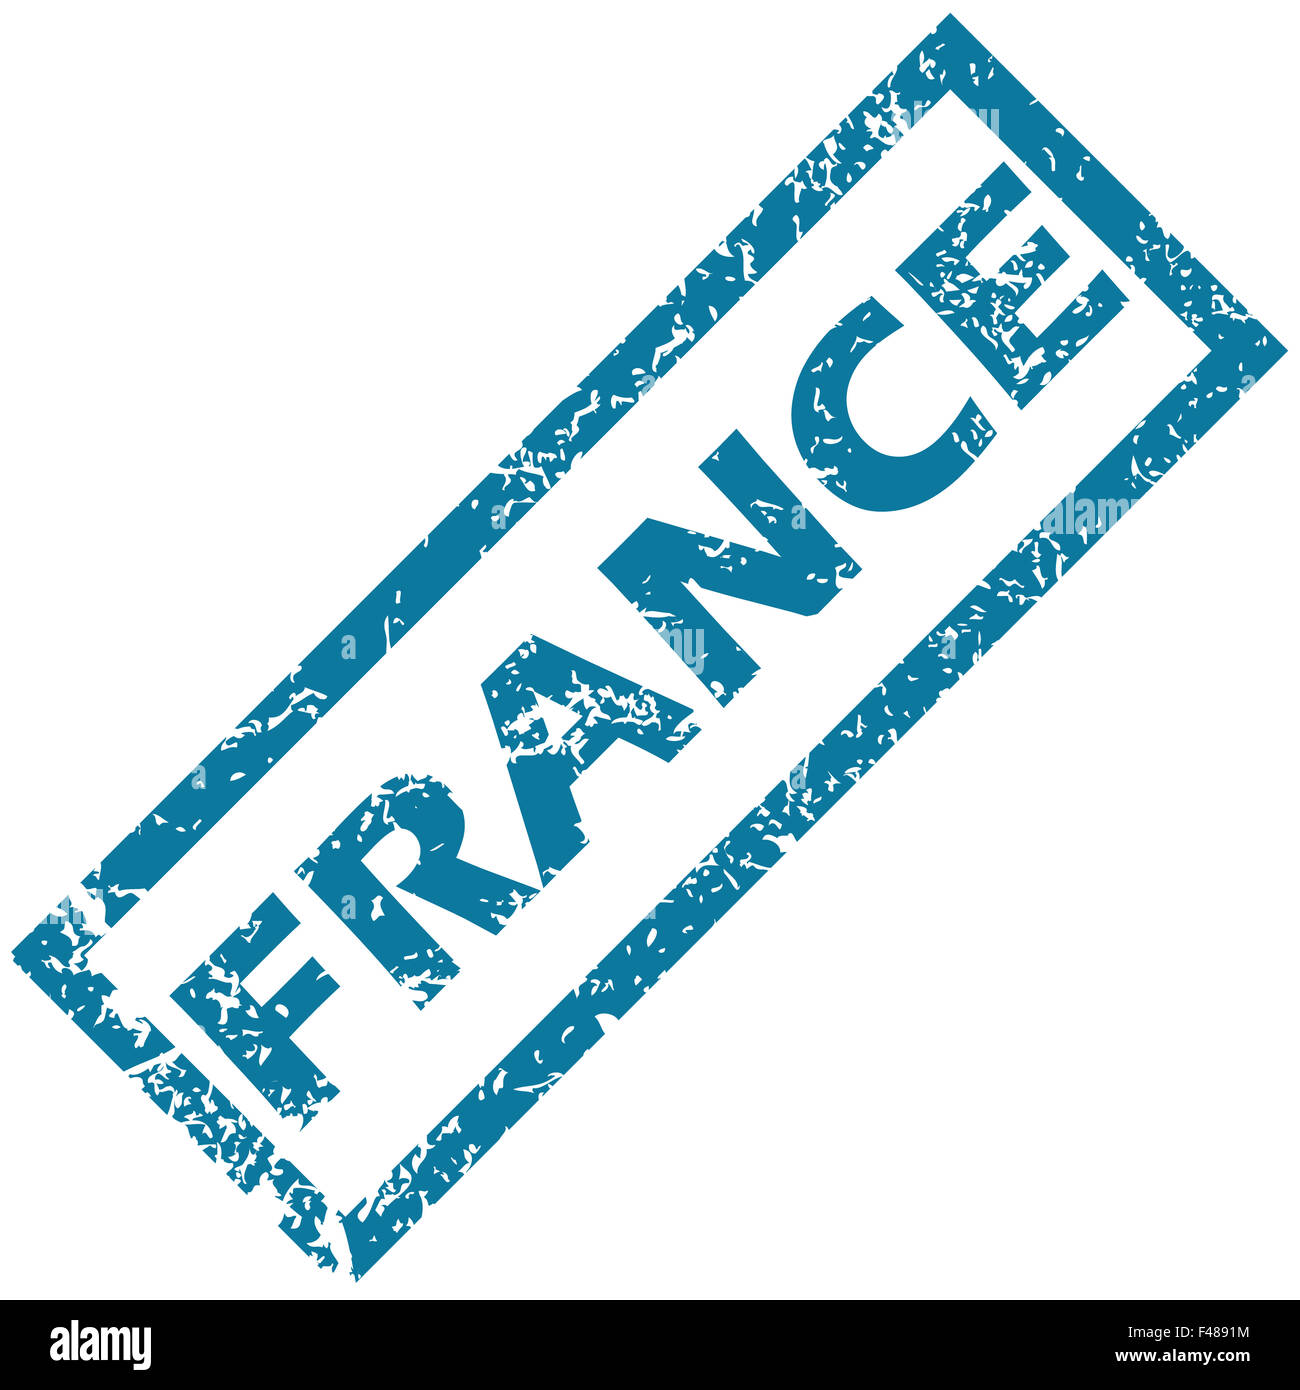 France rubber stamp Stock Photo